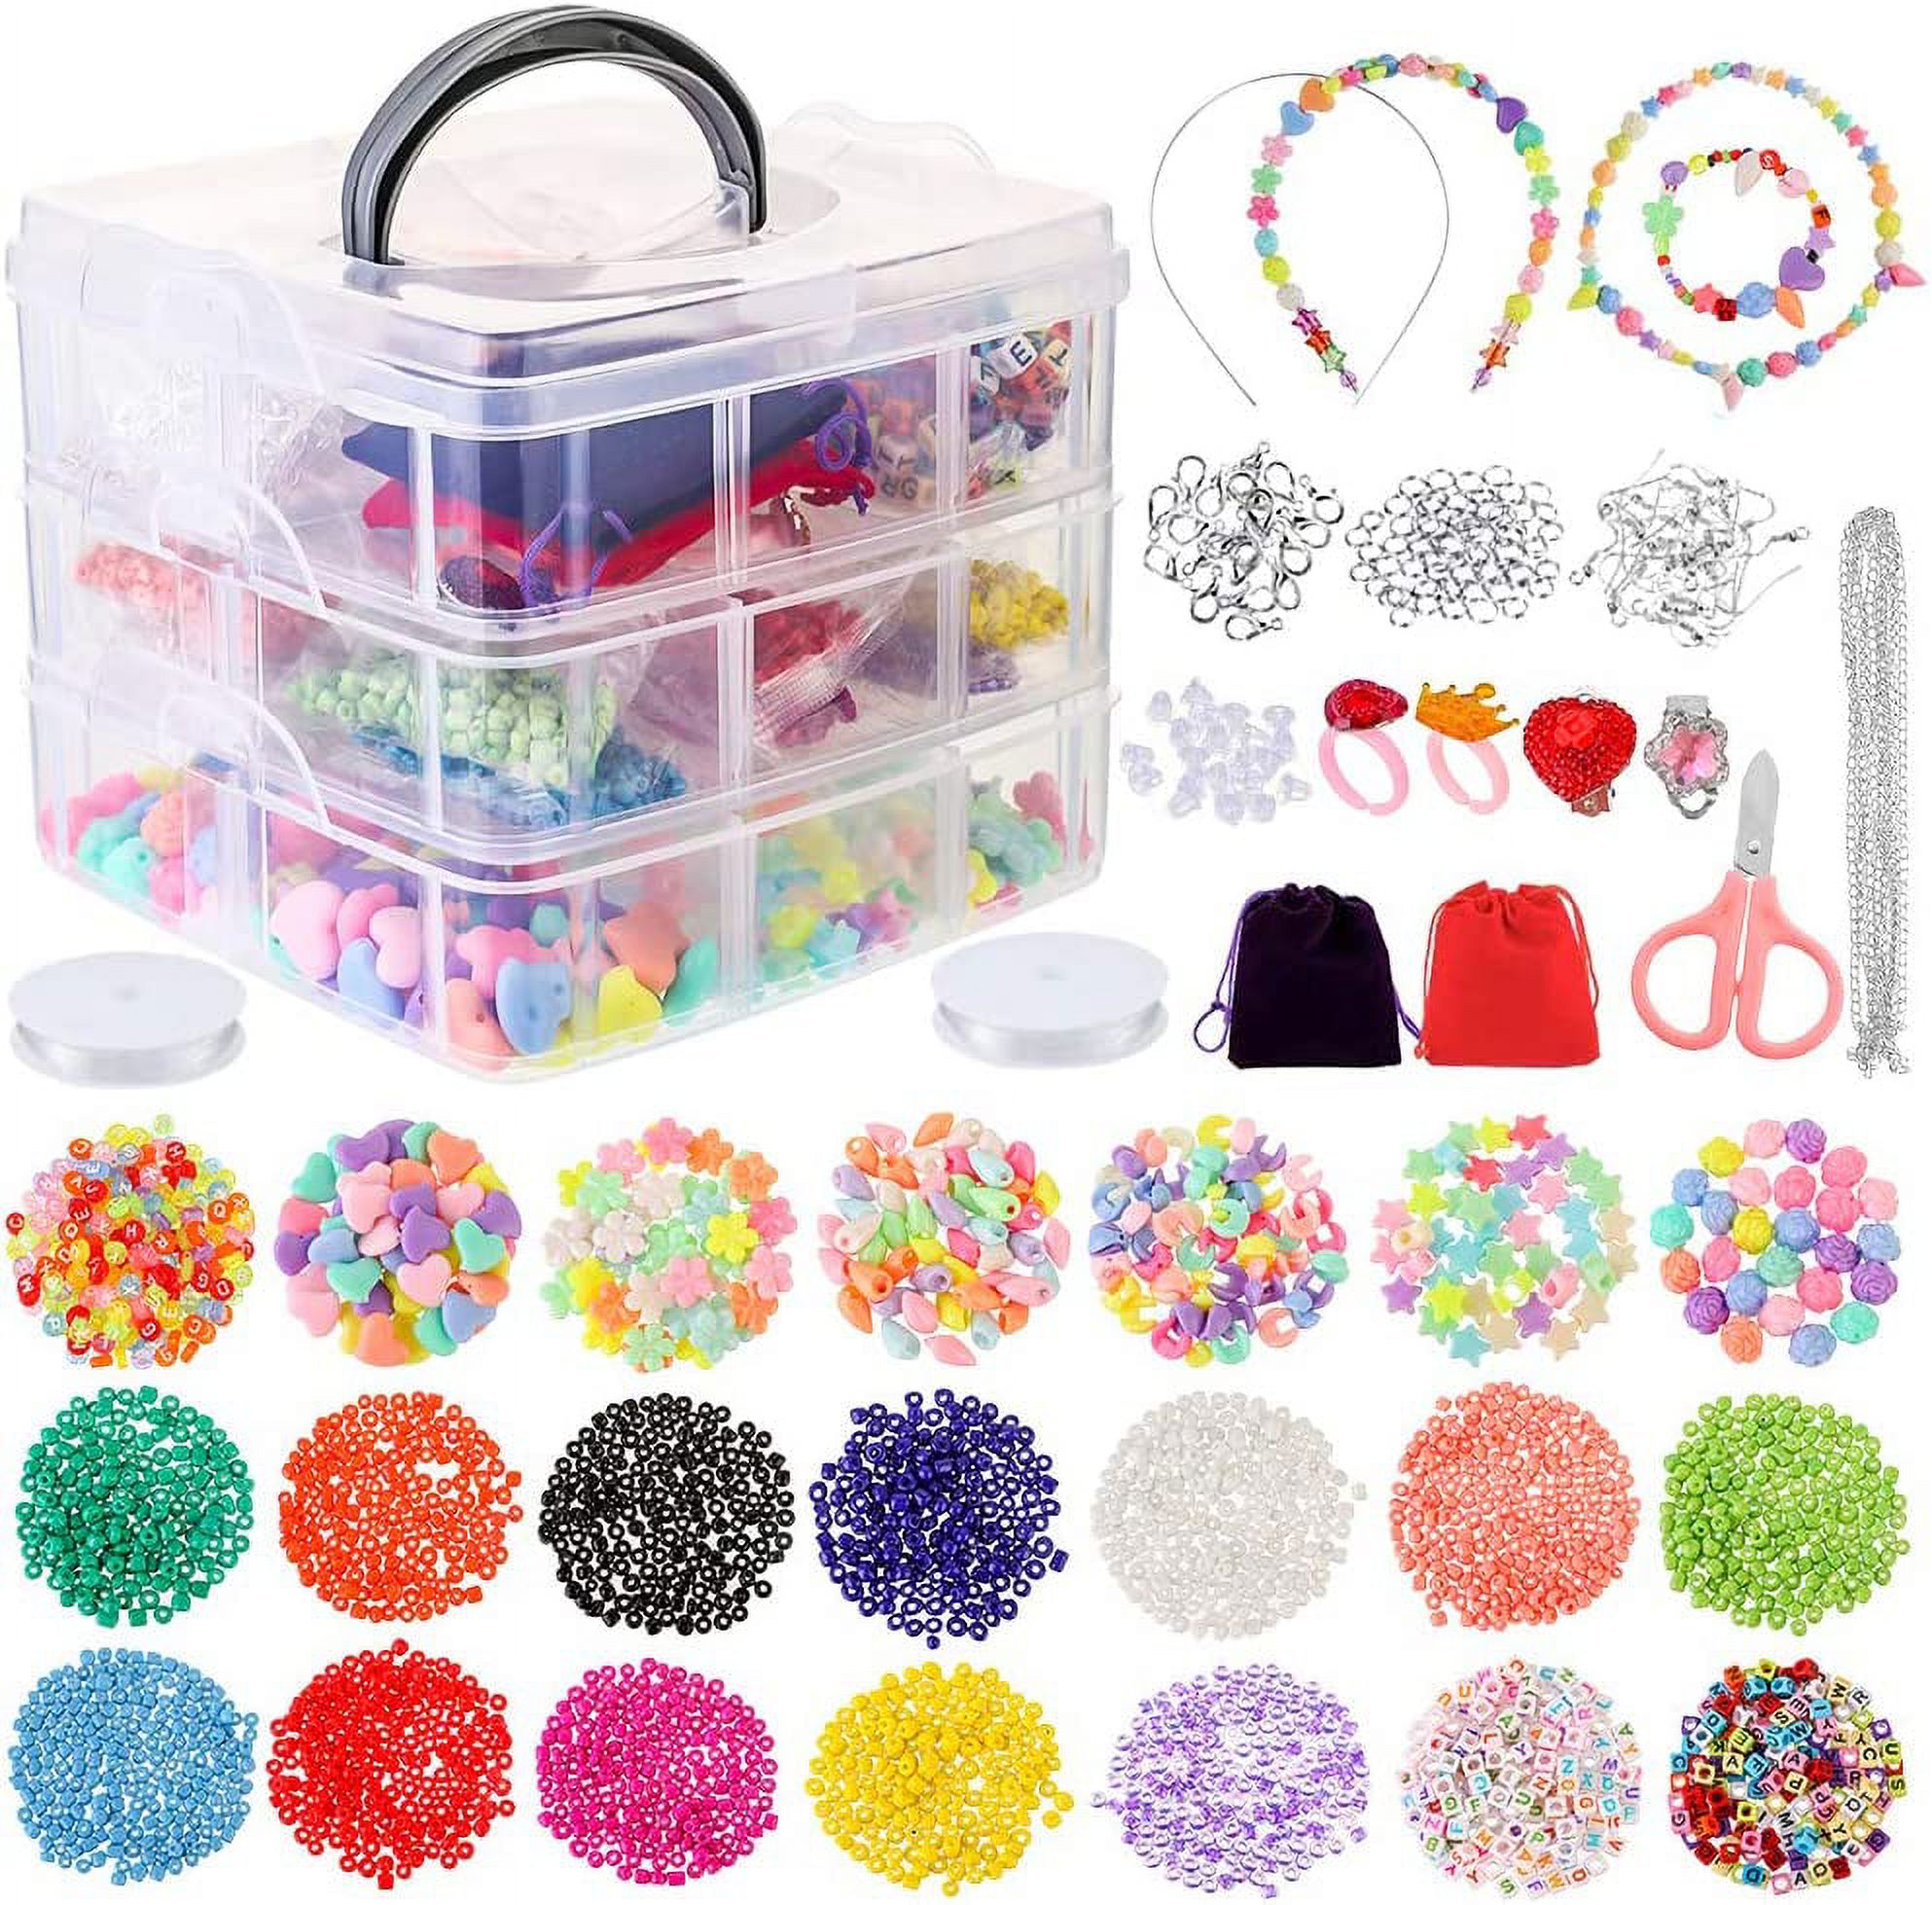 Jewelry Making Kit,Jewelry Making Supplies 7544PCS Include Jewelry Beads and Charms Findings Beading Wire for Necklace Bracelet Earrings Making Repair Jewelry Making Tools Kits for Adults - image 2 of 9